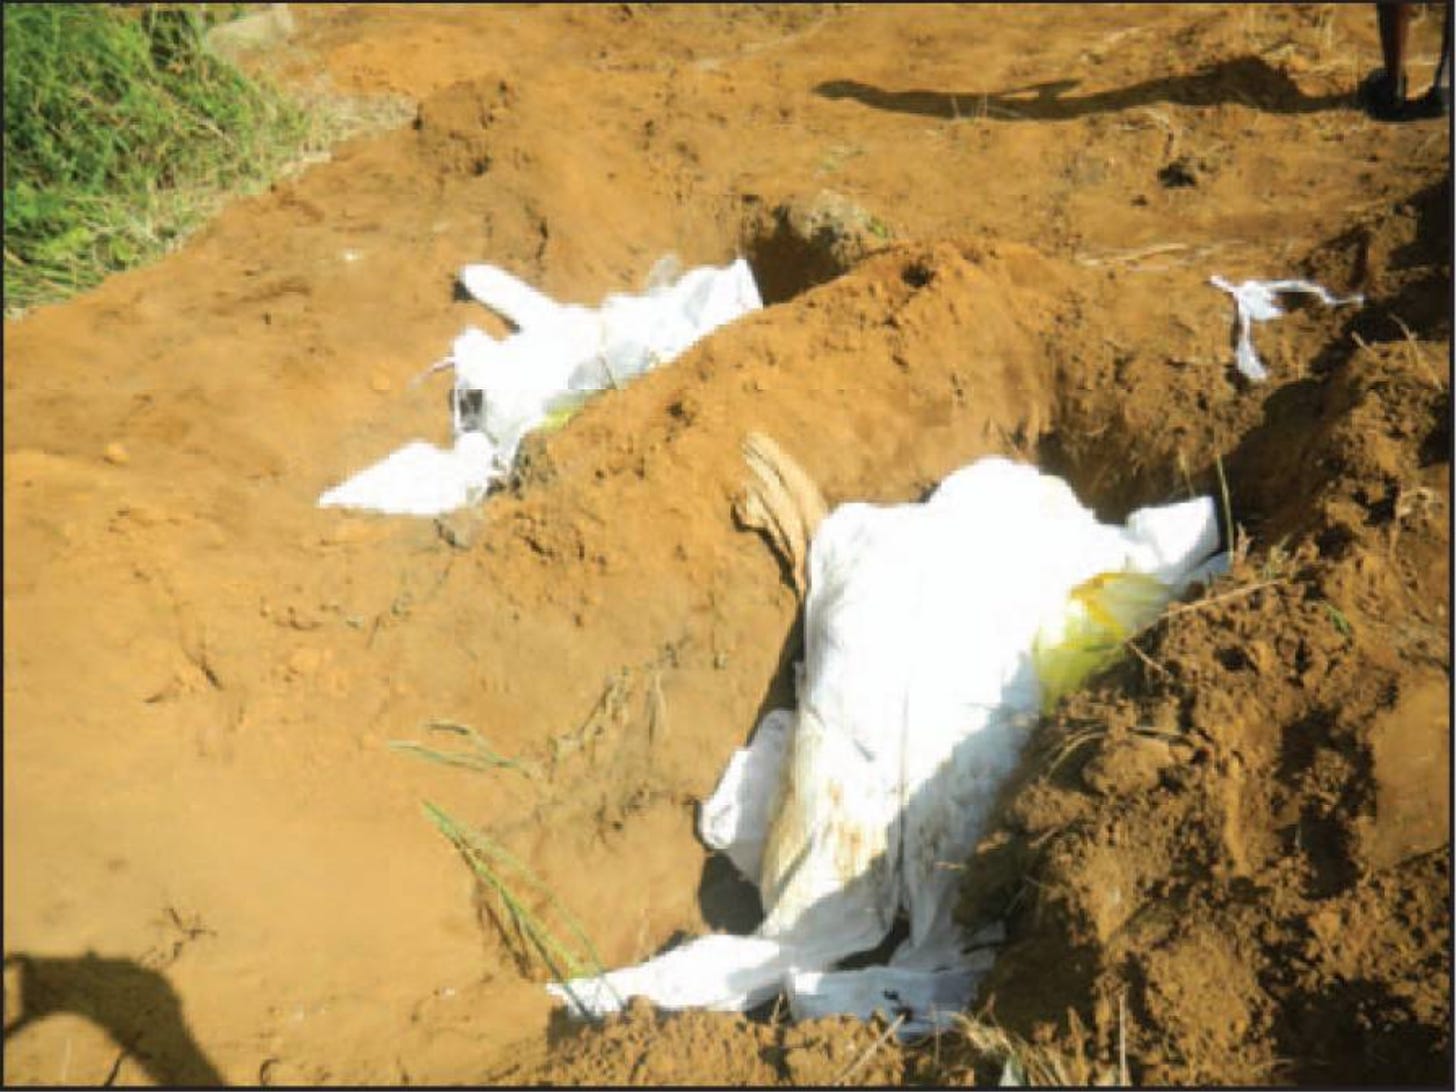 Two Sierra Leonean bodies lay covered in soiled PPE and medical waste in shallow, unmarked graves. 